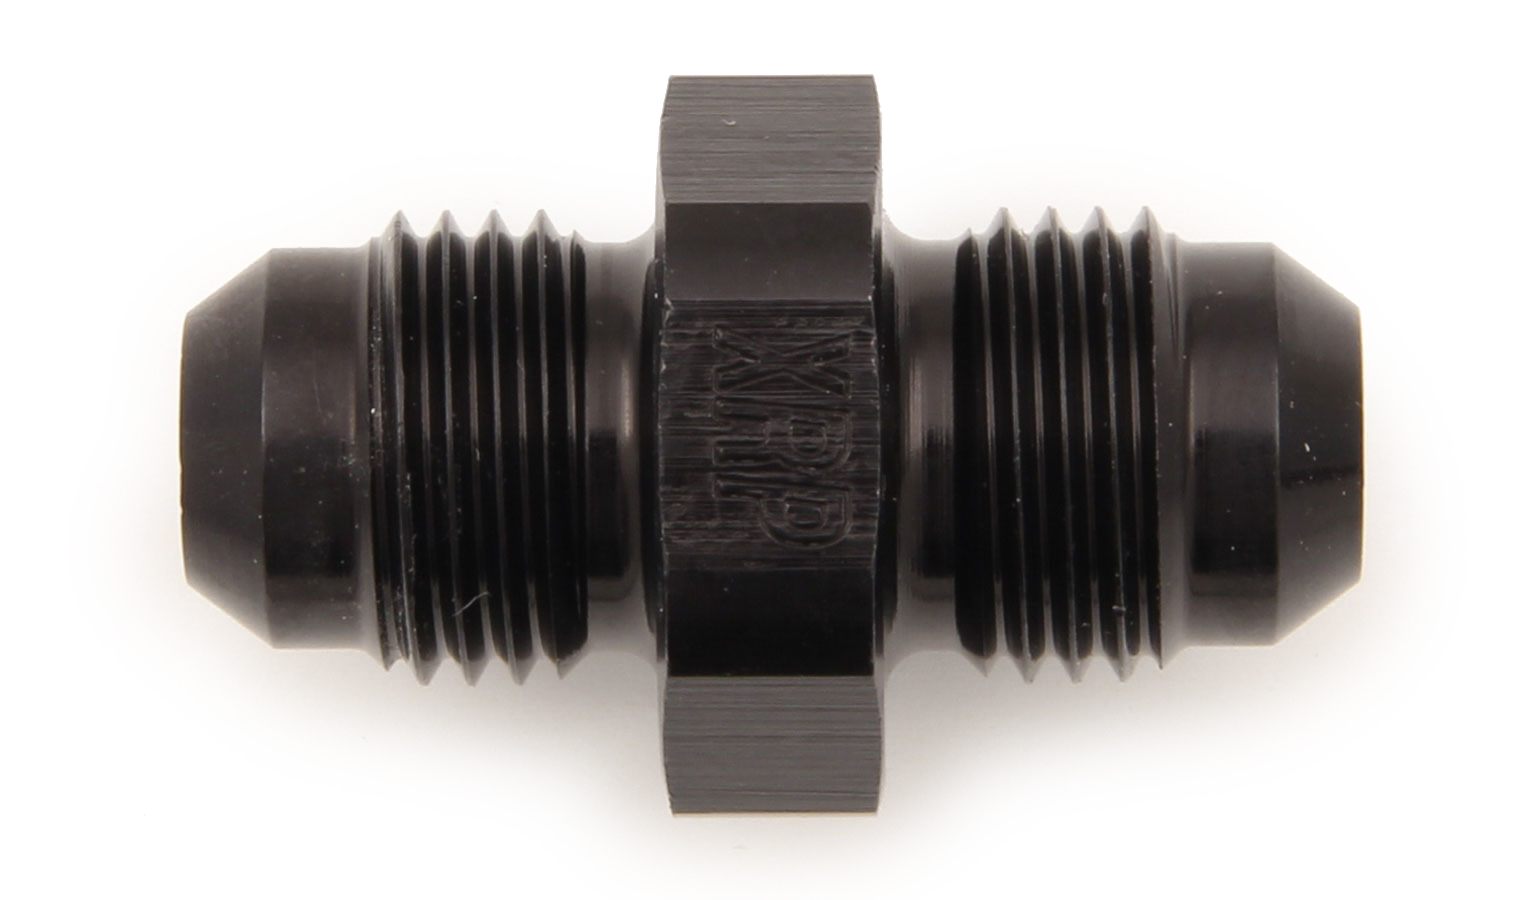 XRP 981503BB - Fitting, Adapter, Straight, 3 AN Male to 3 AN Male, Aluminum, Black Anodized, Each